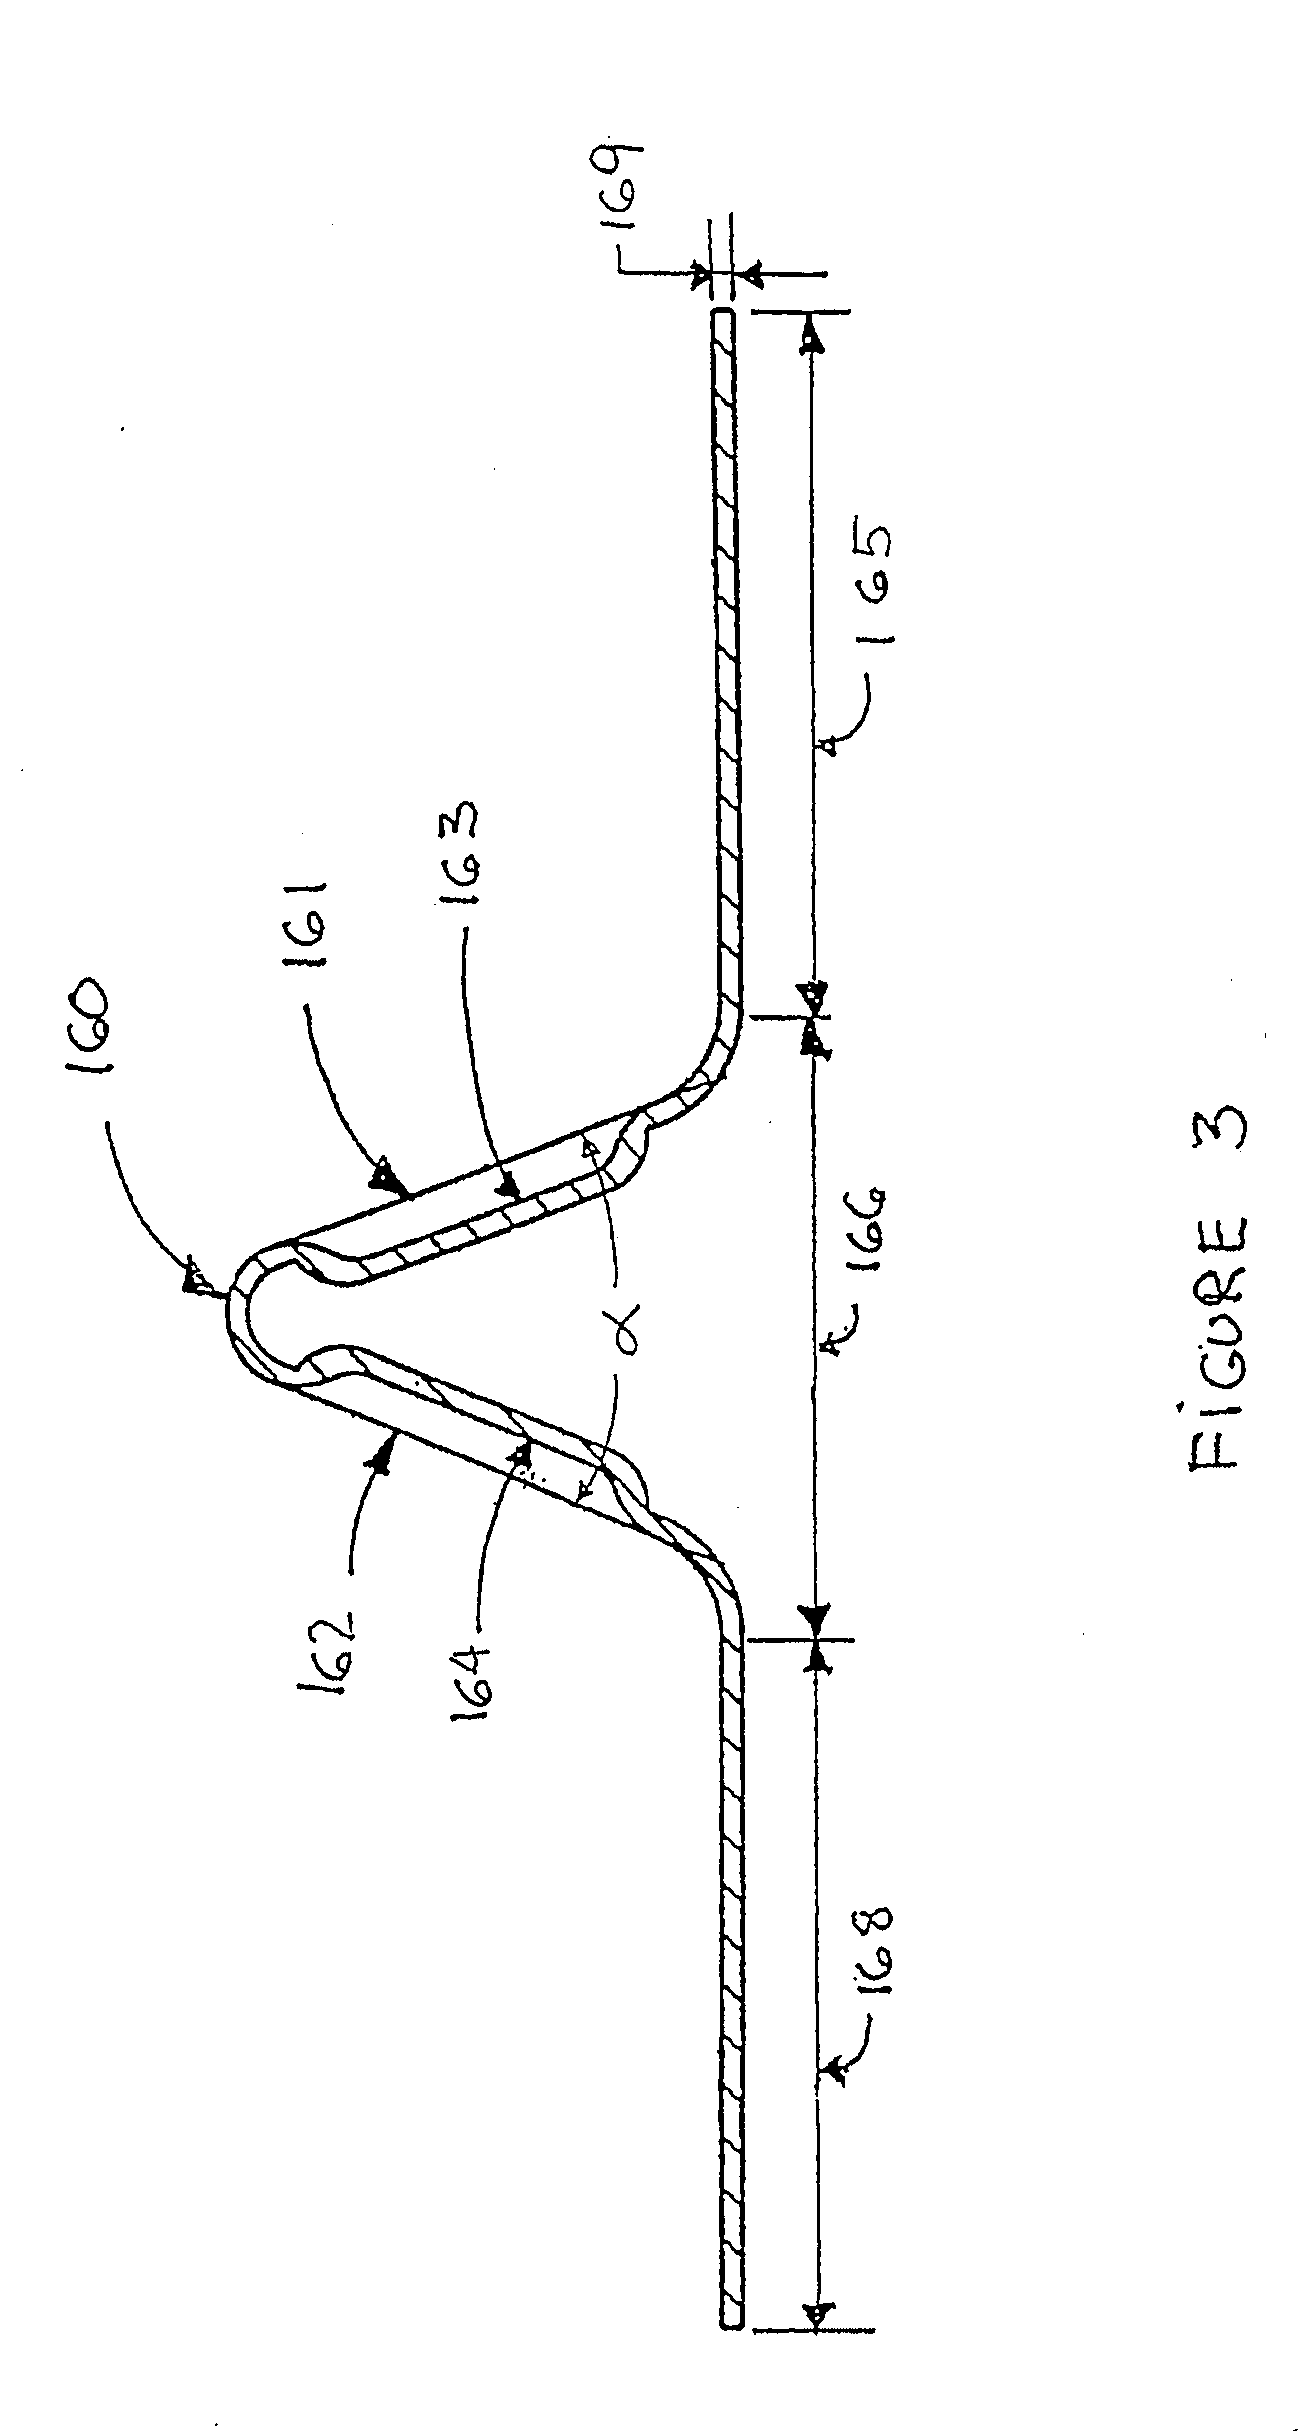 Elastomeric Track with Guide Lug Reinforcements